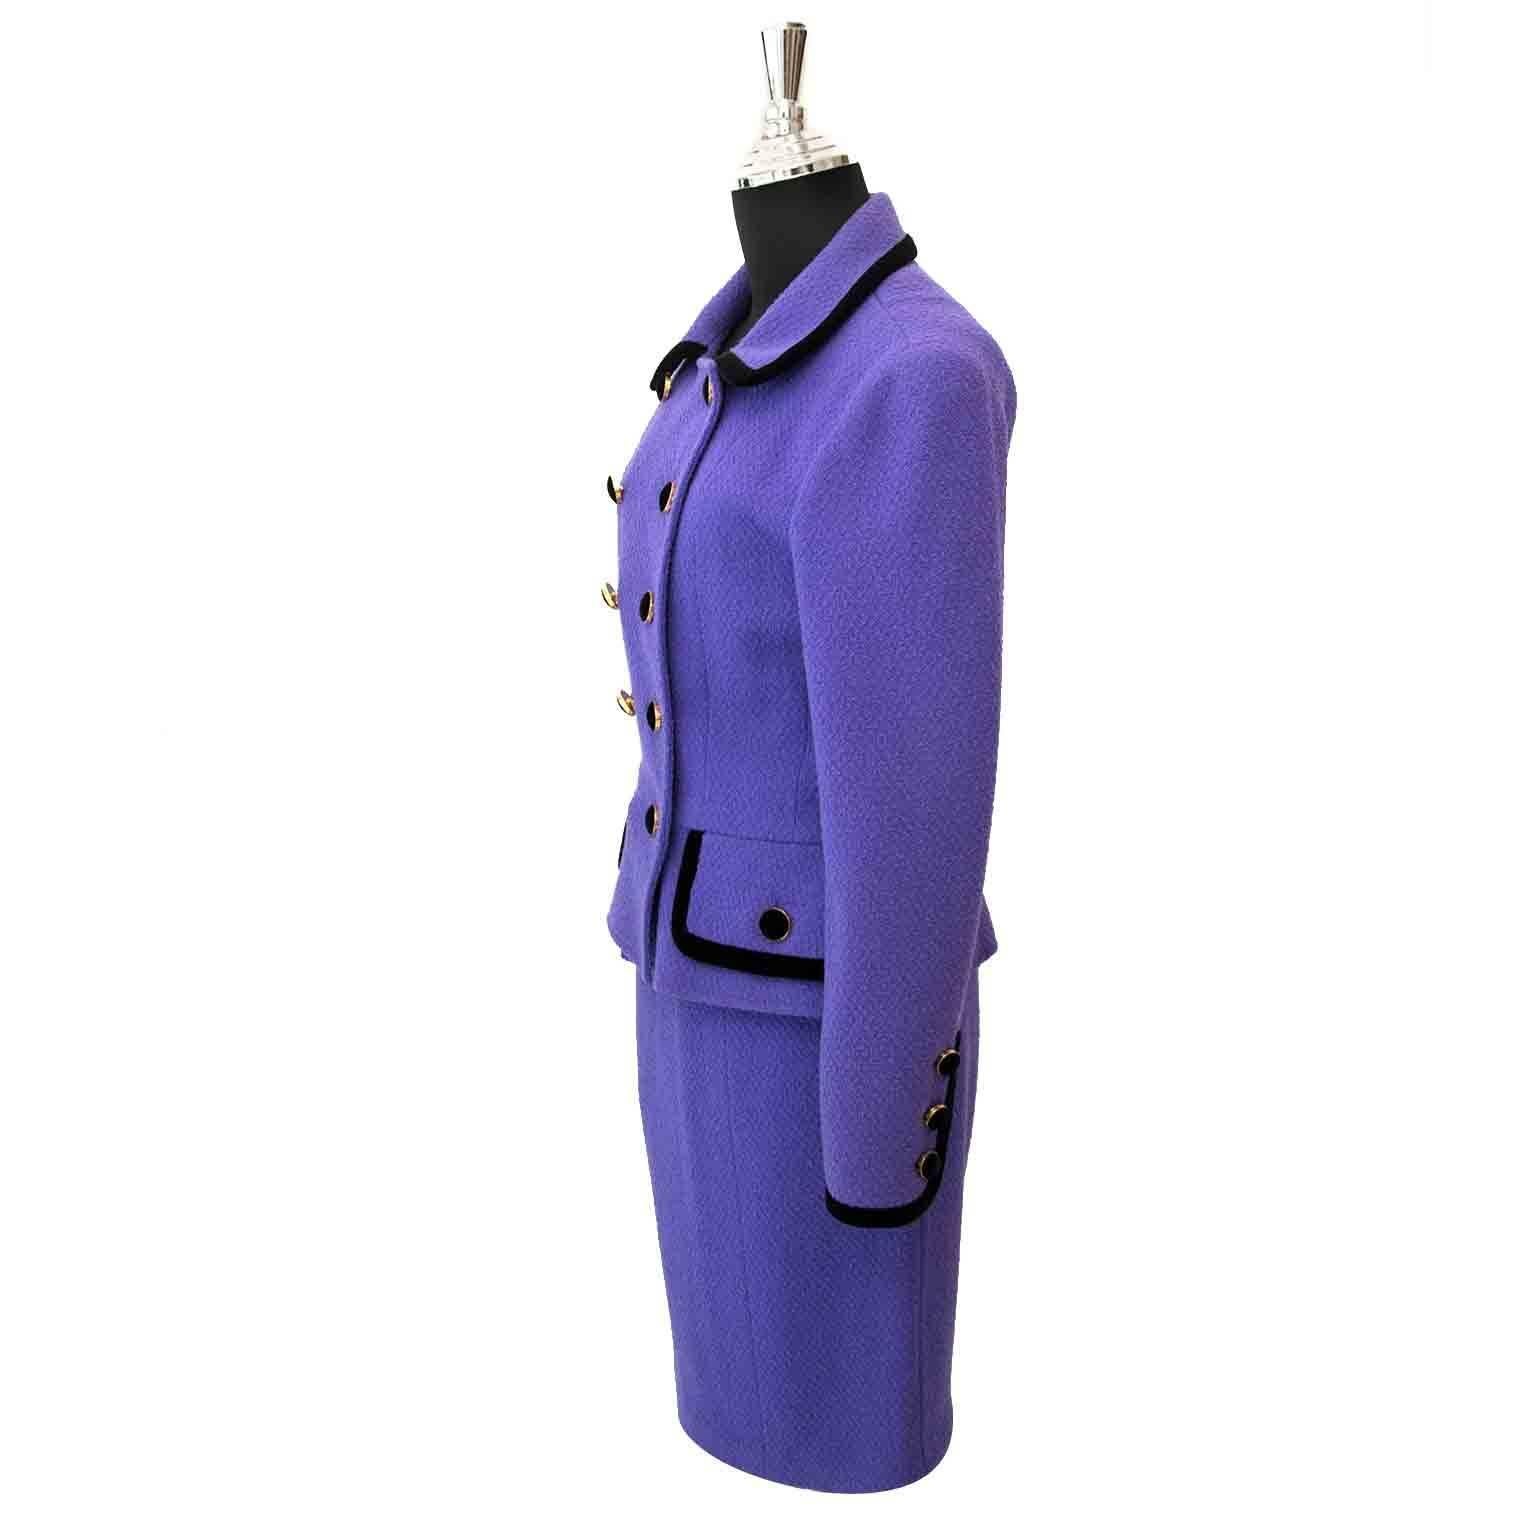 

Chanel Purple Tailleur Set

This classy 'deux-pièce' Chanel comes in a bright purple color.
The fabric contains 99% wool and 1% nylon.

The blazer is finished with black velvet details on the buttons.

You can wear this as an ensemble or combine